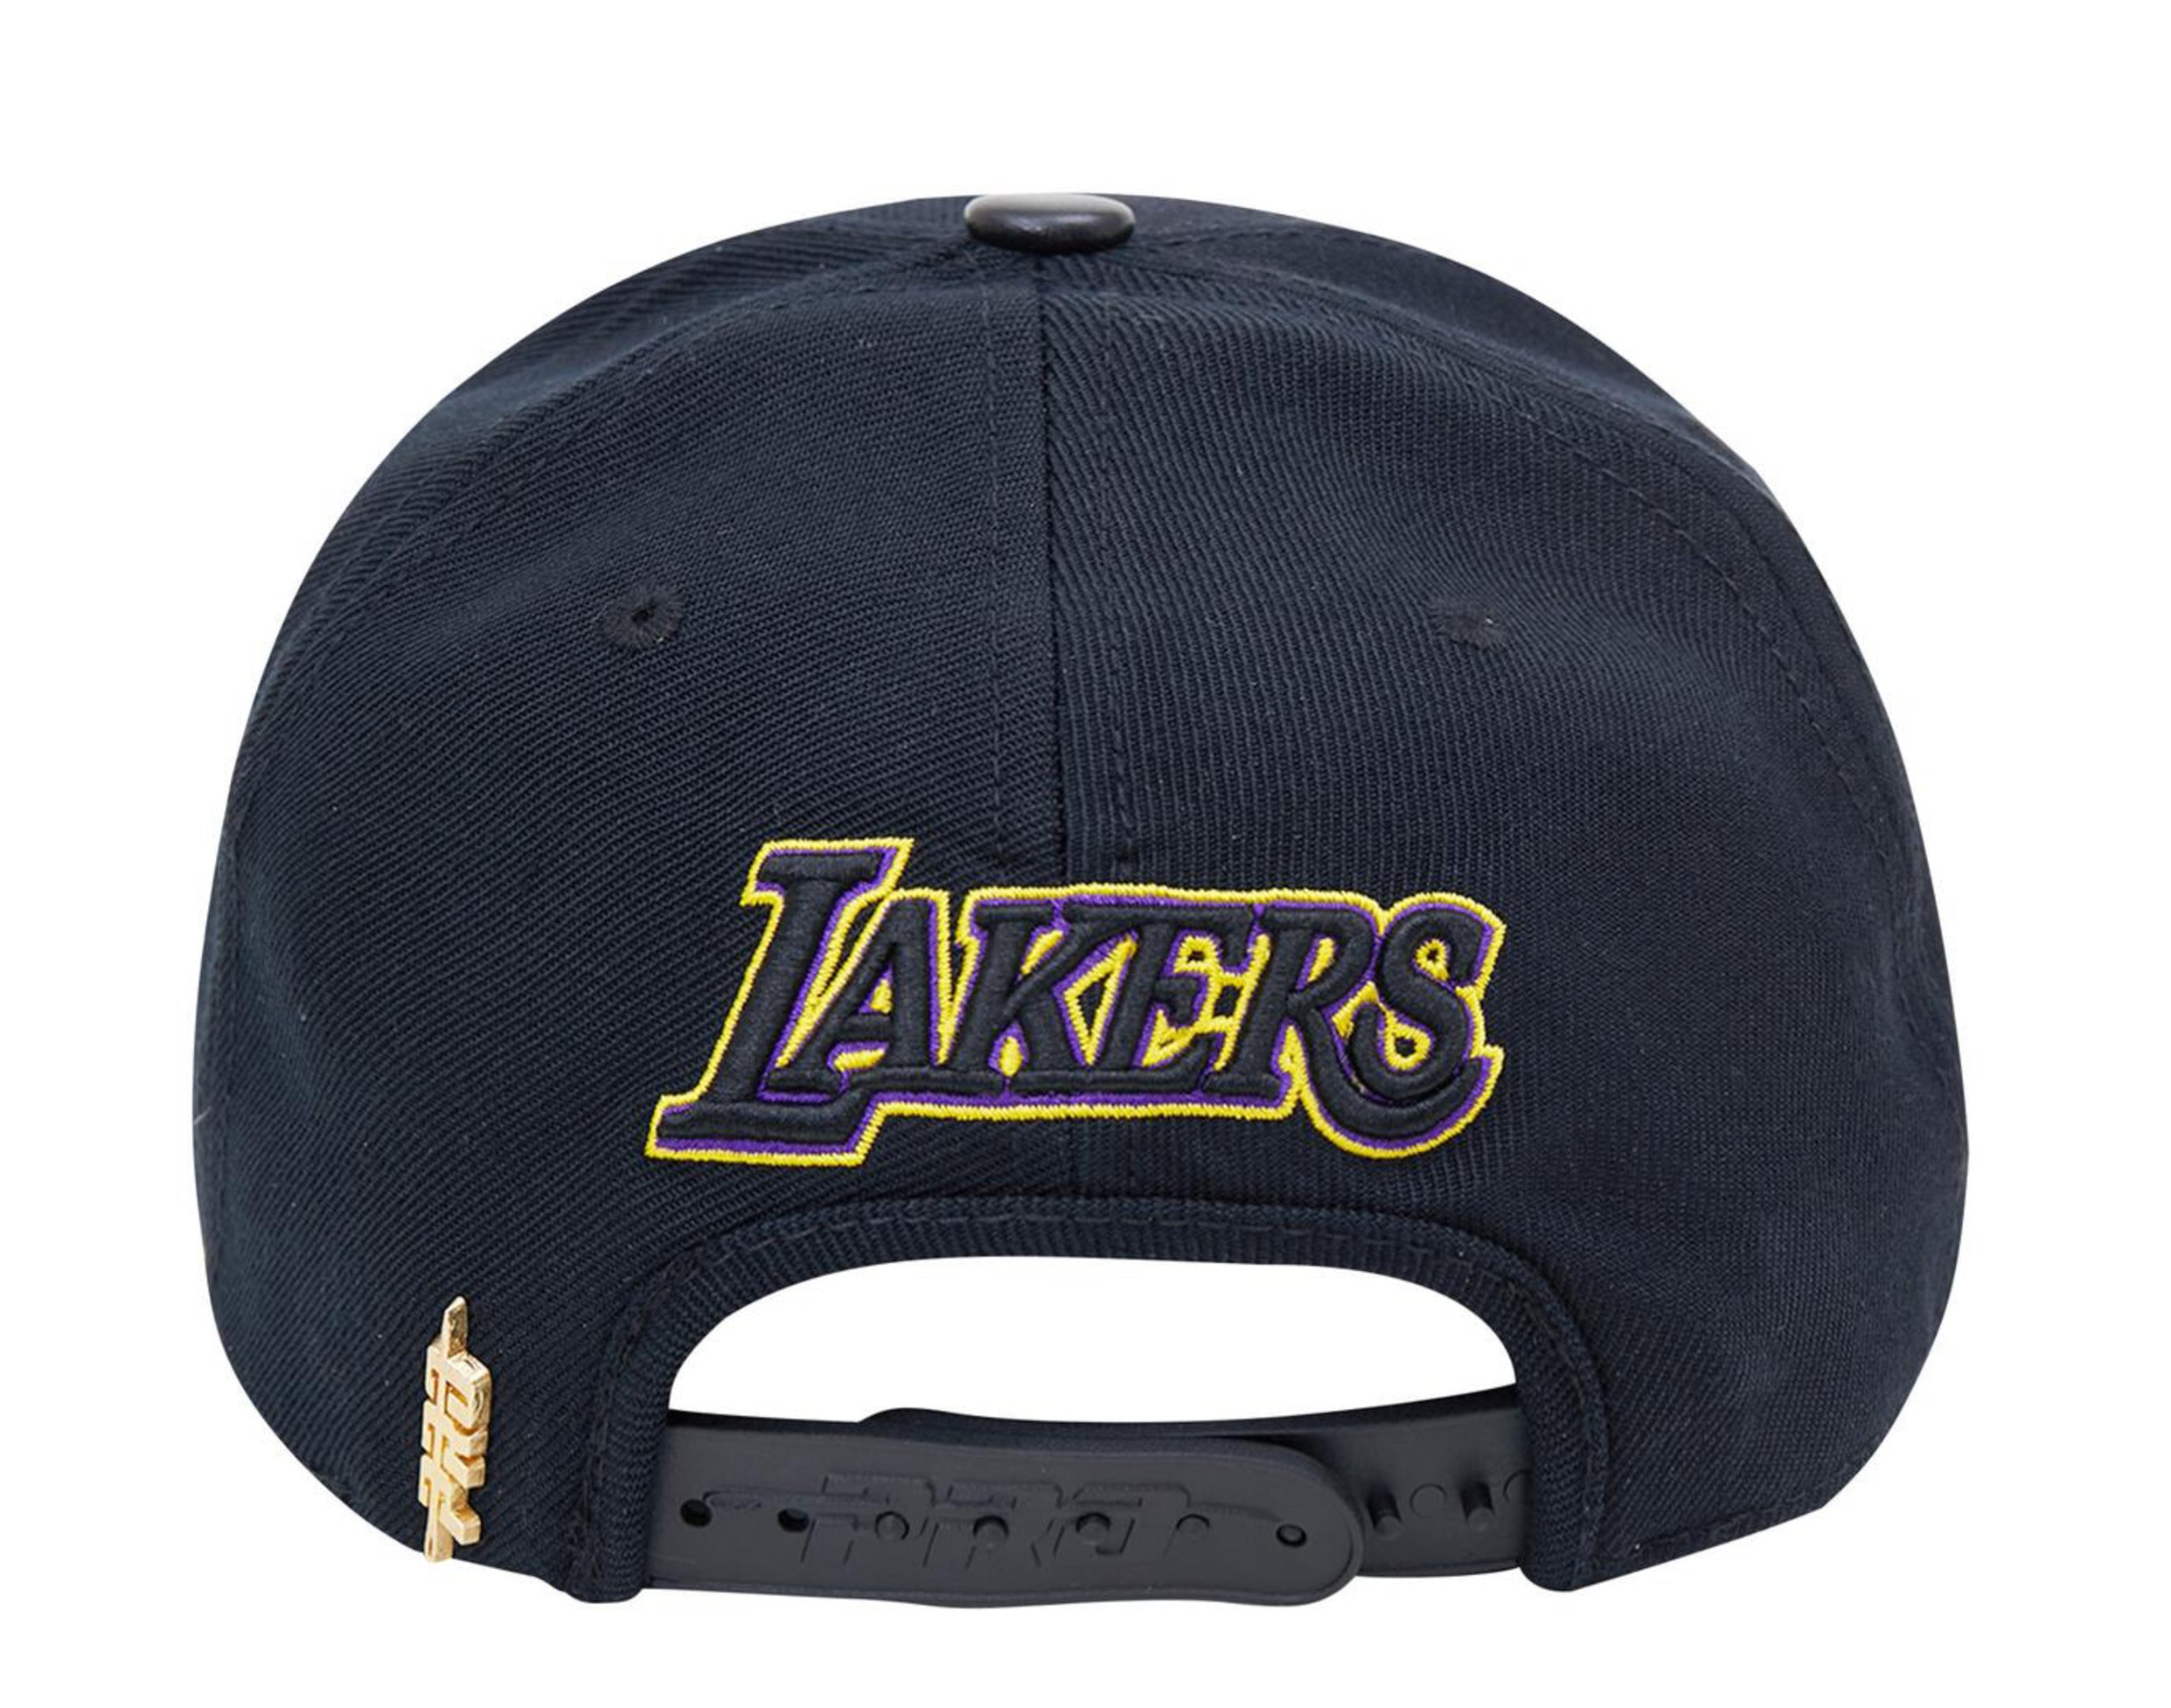 pink lakers hat